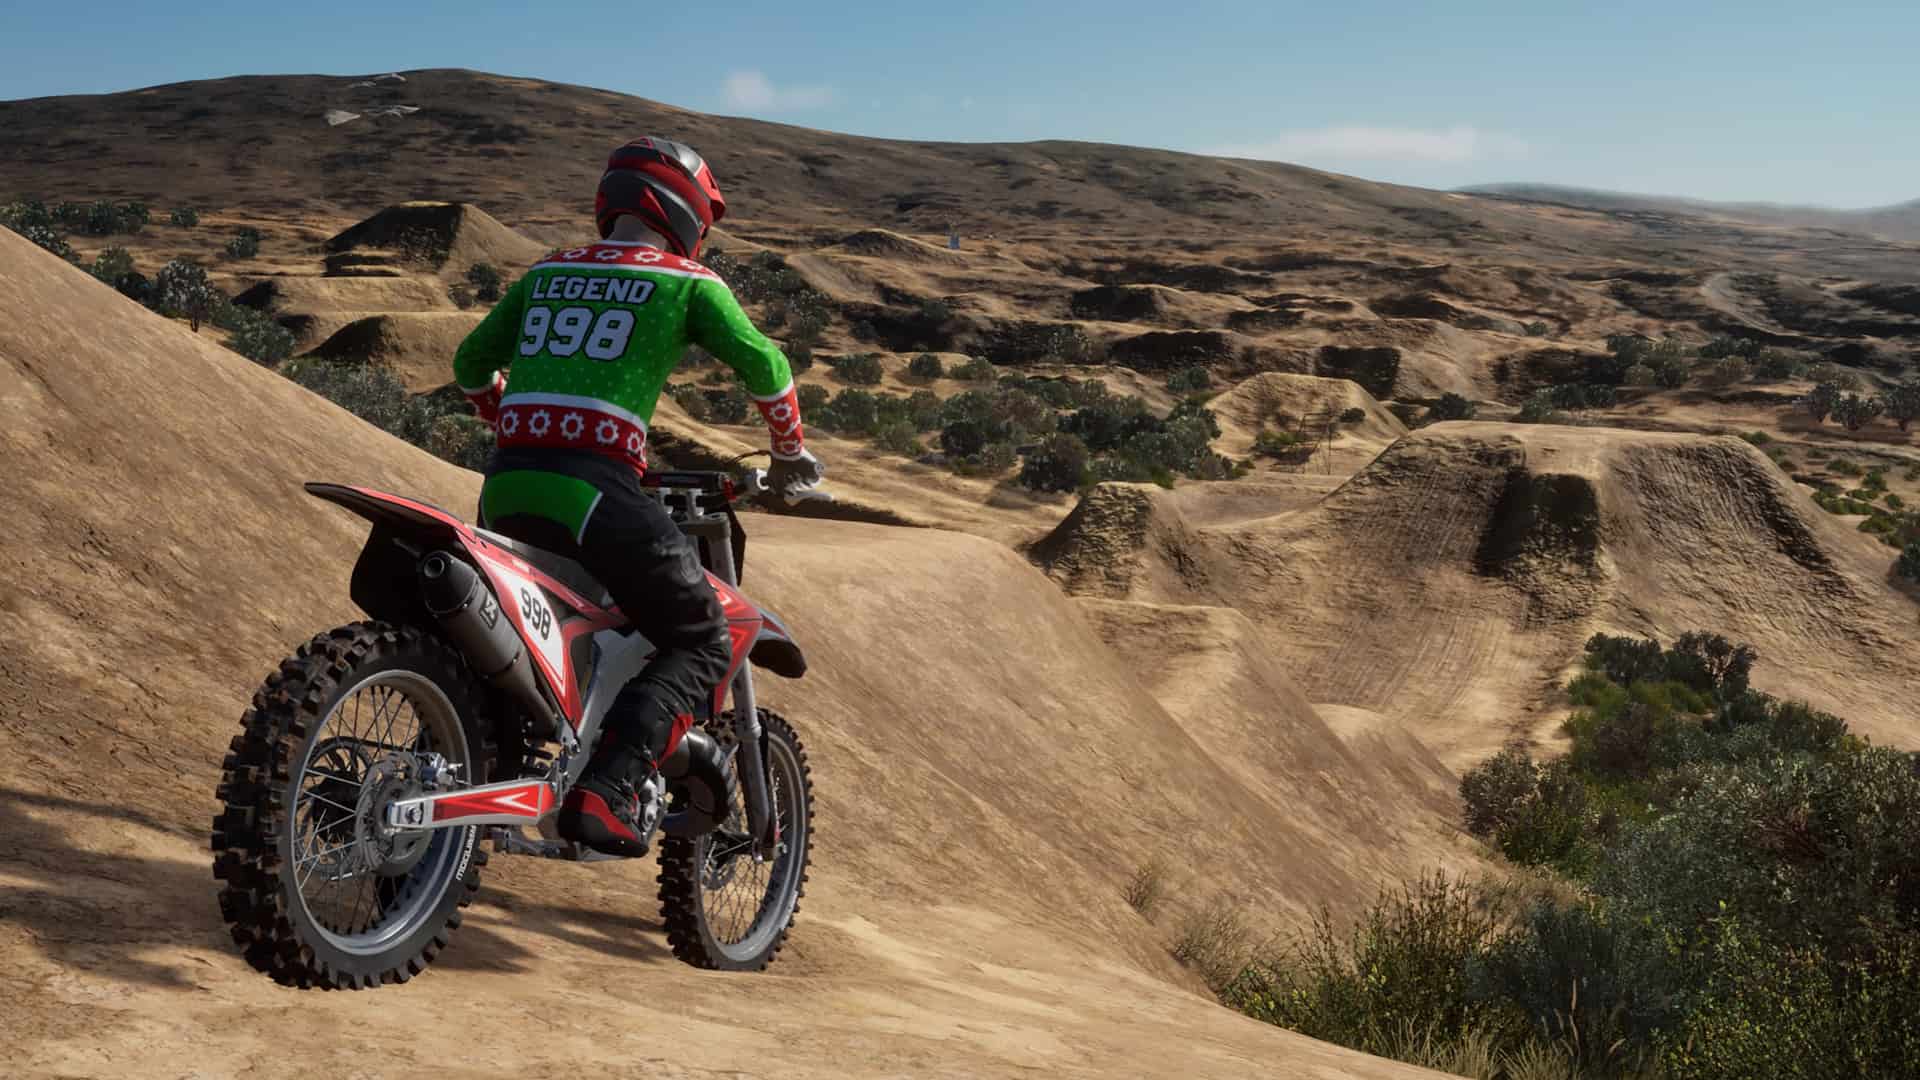 MX vs ATV Legends continues its journey with significant physics changes